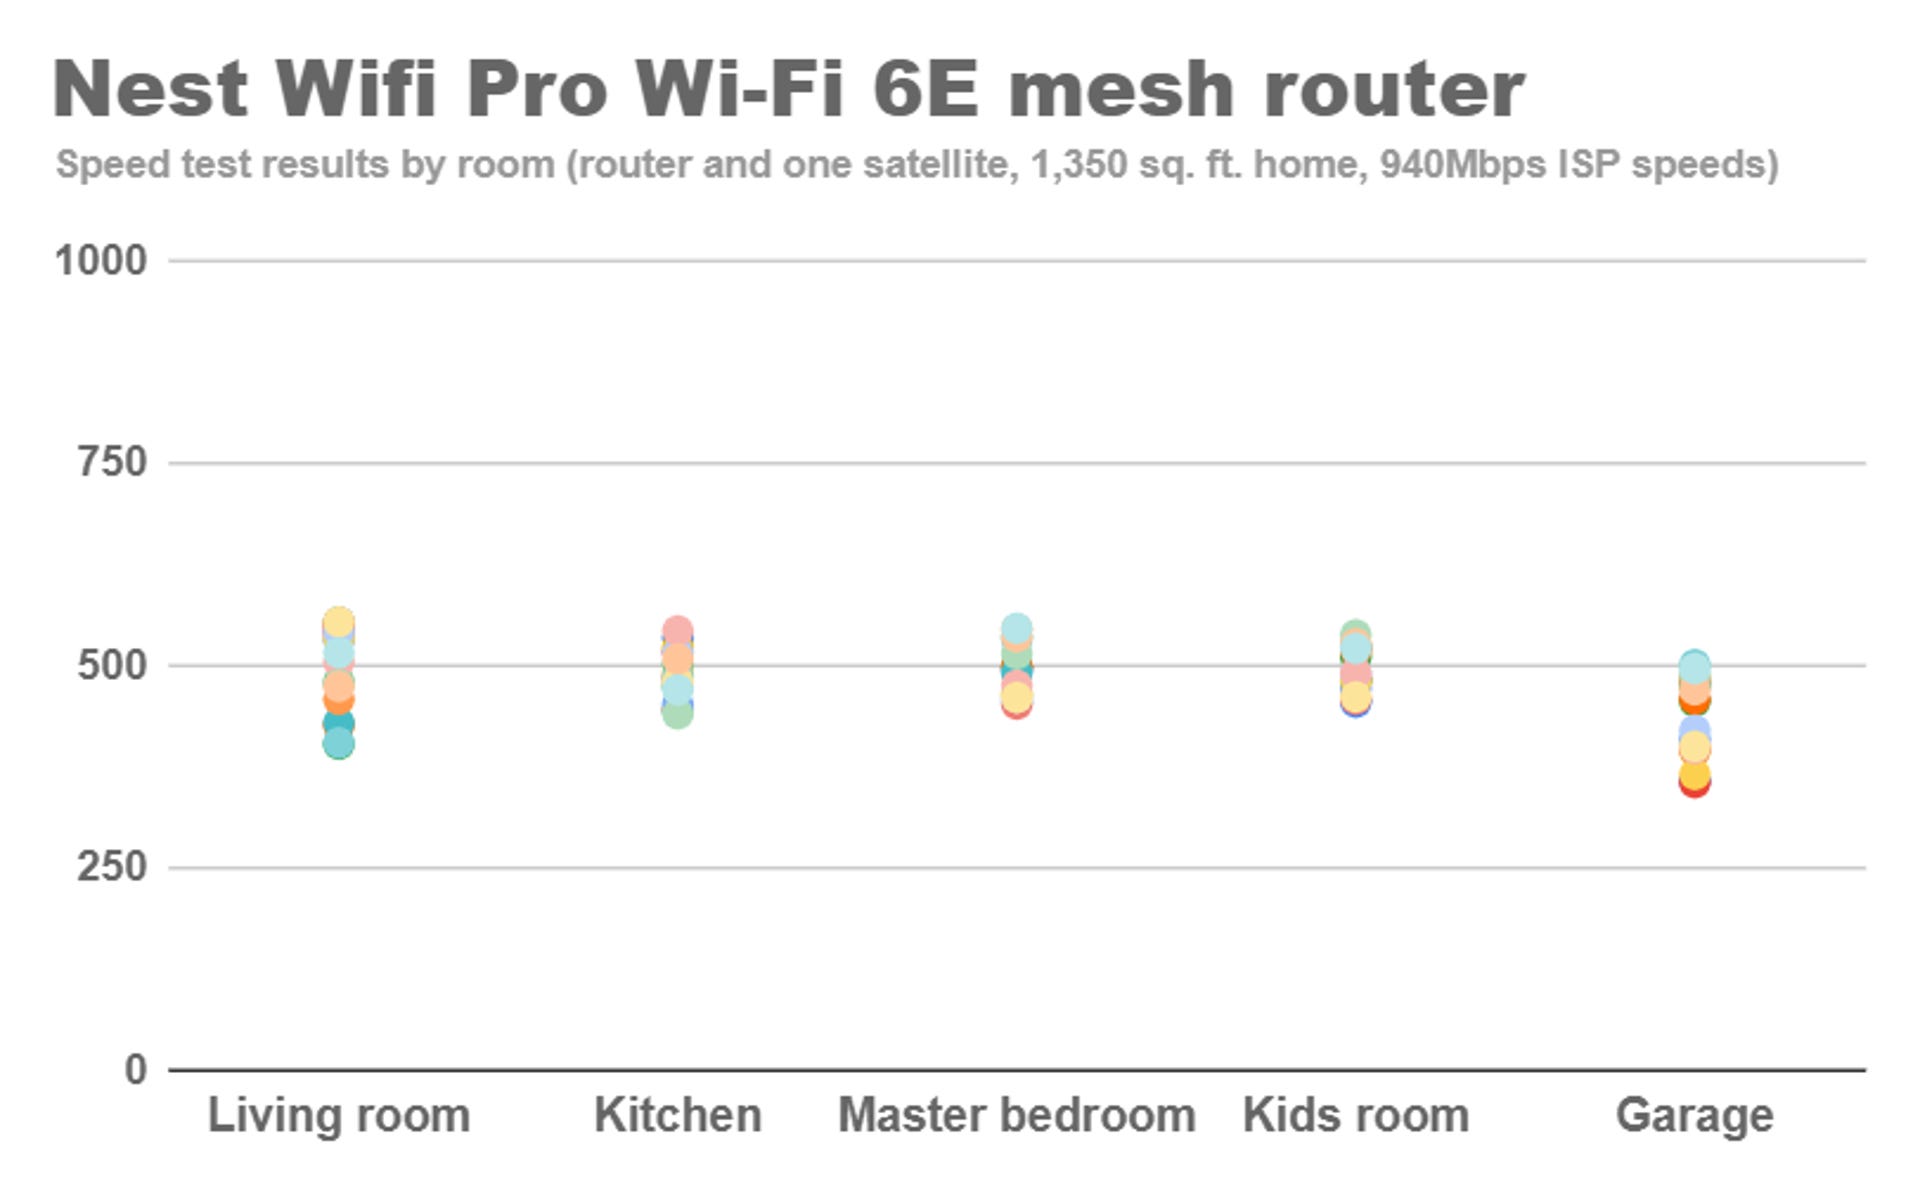 A scatter plot showing the download speed test results for the Nest Wifi Pro mesh router across five rooms in a 1,350 sq. ft. test environment. Across multiple rounds of tests, the speeds were remarkably consistent in each room, but not as high as you might expect at around 500Mbps.